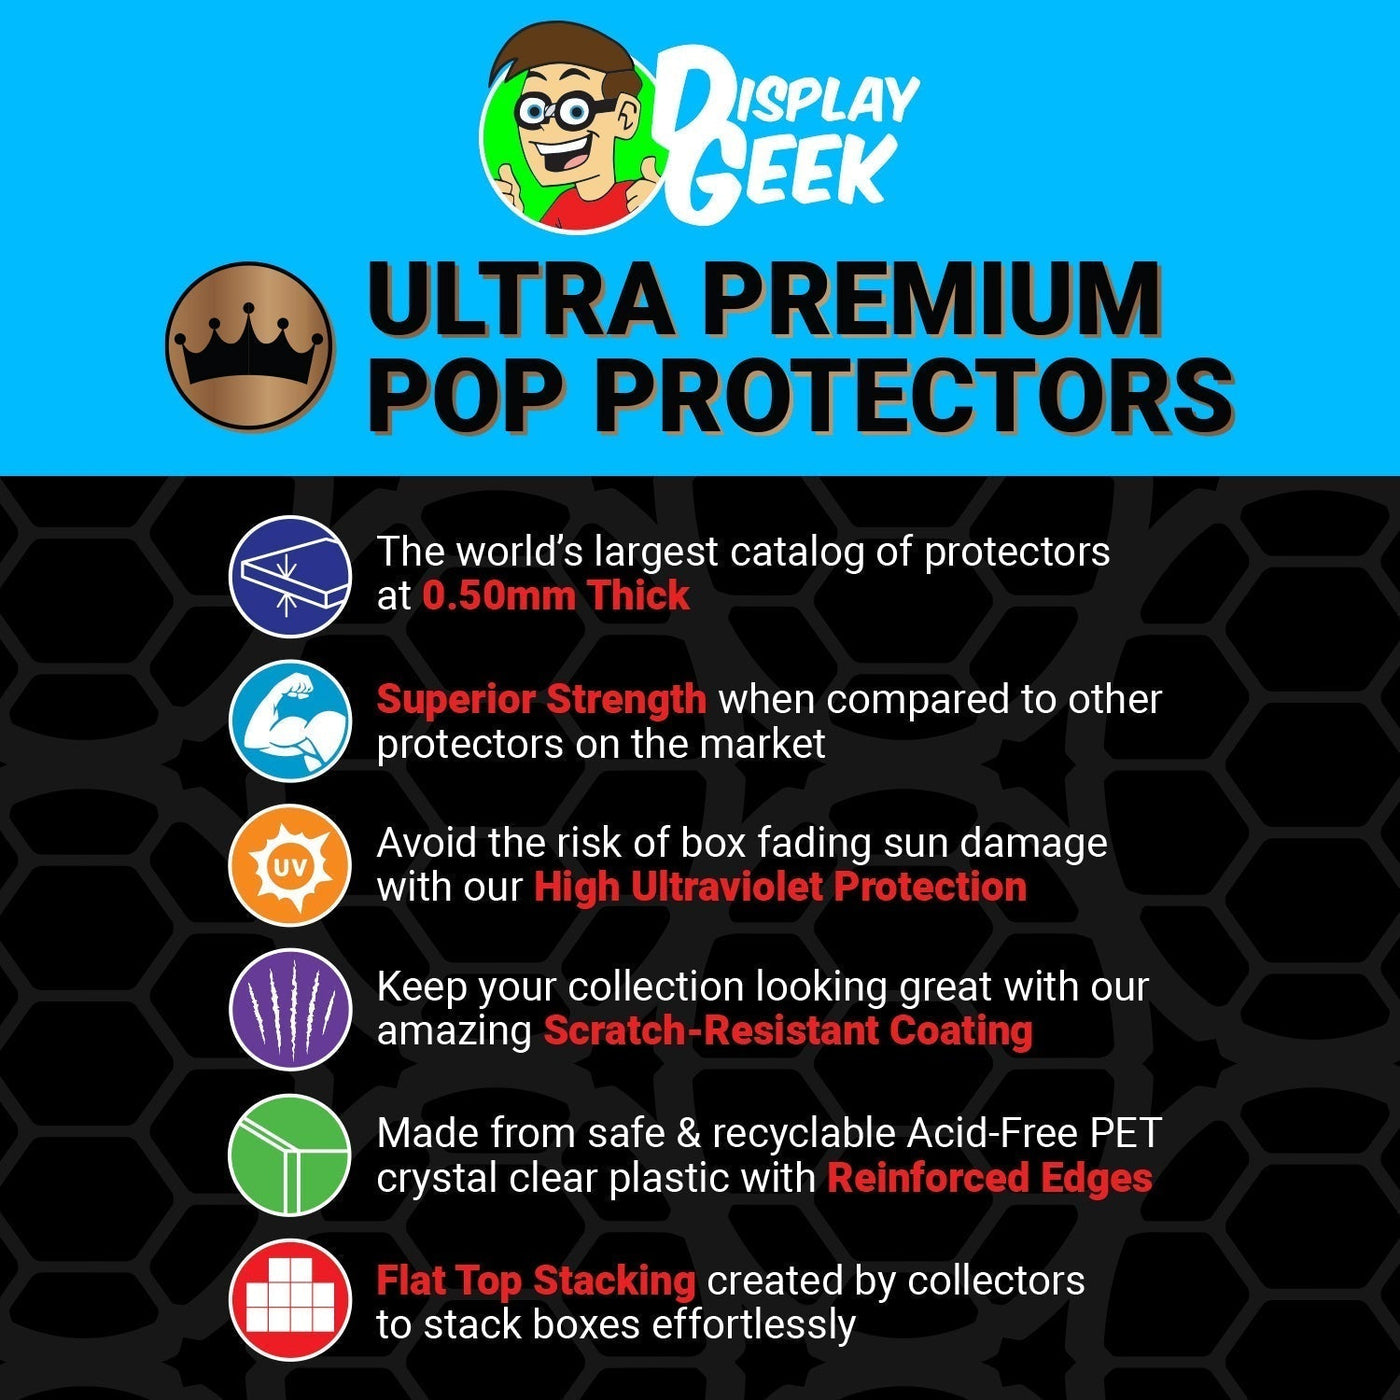 Pop Protector for 6 inch Giant Lady White & Gold #99 Super Funko Pop on The Protector Guide App by Display Geek